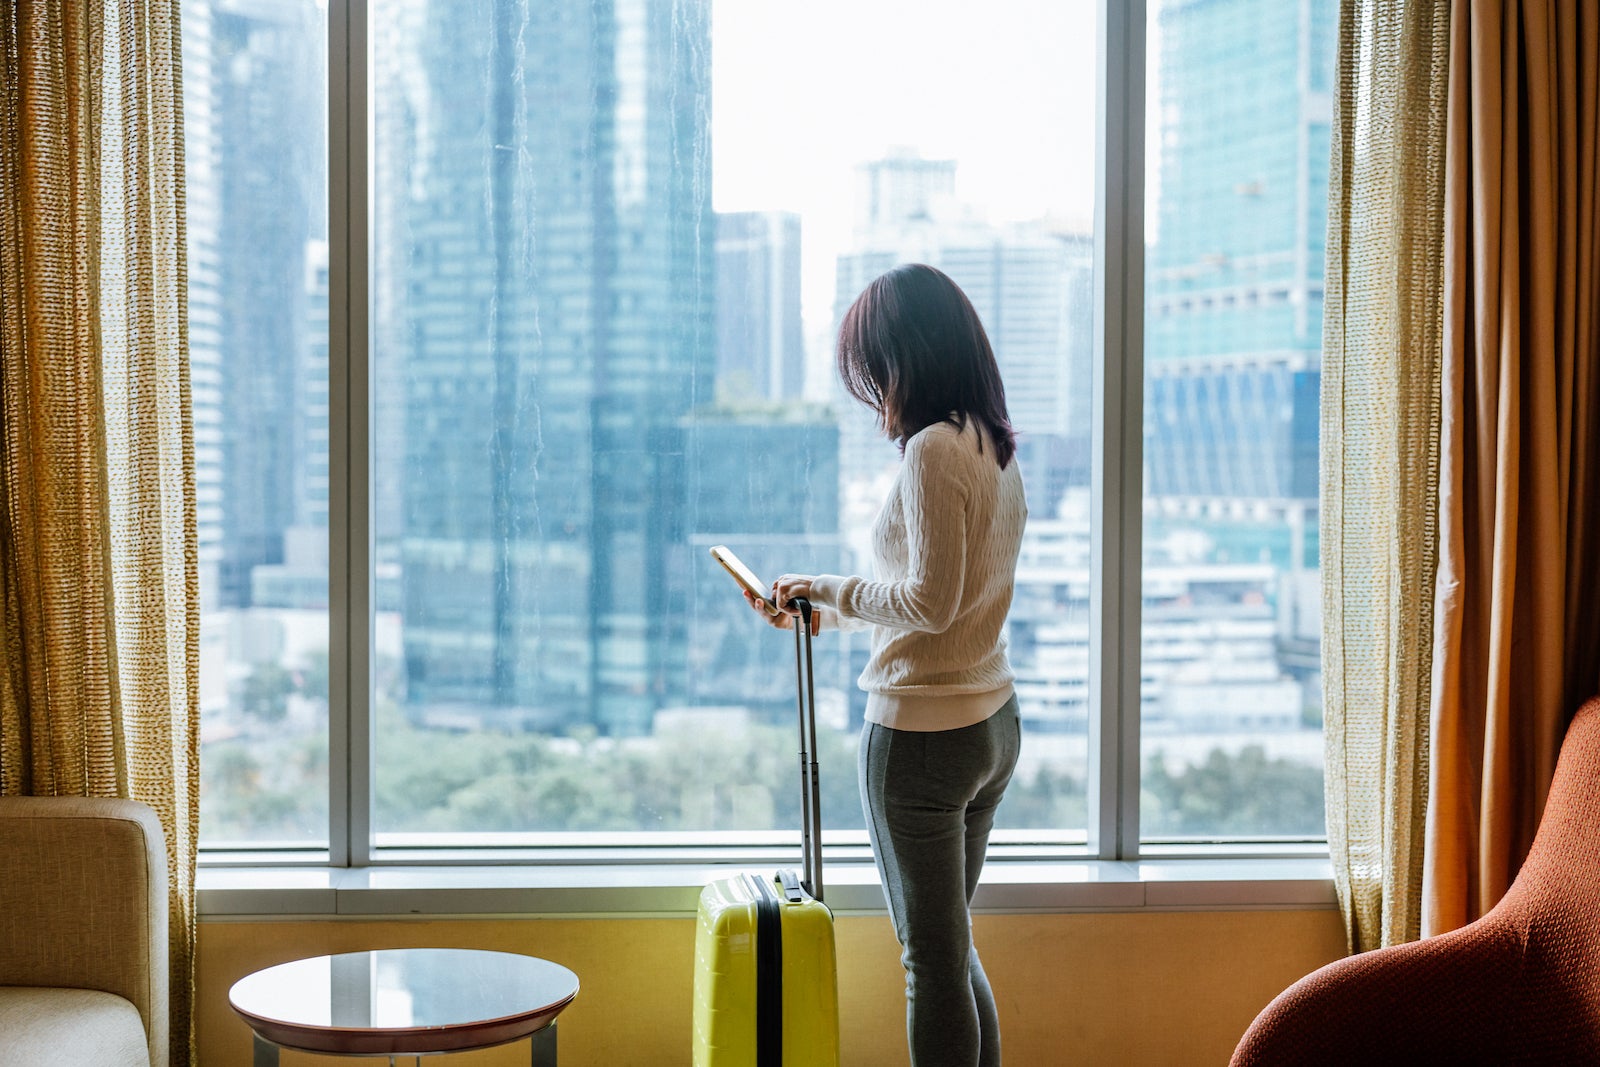 The 8 best hotel booking apps every traveler should download - The Points Guy